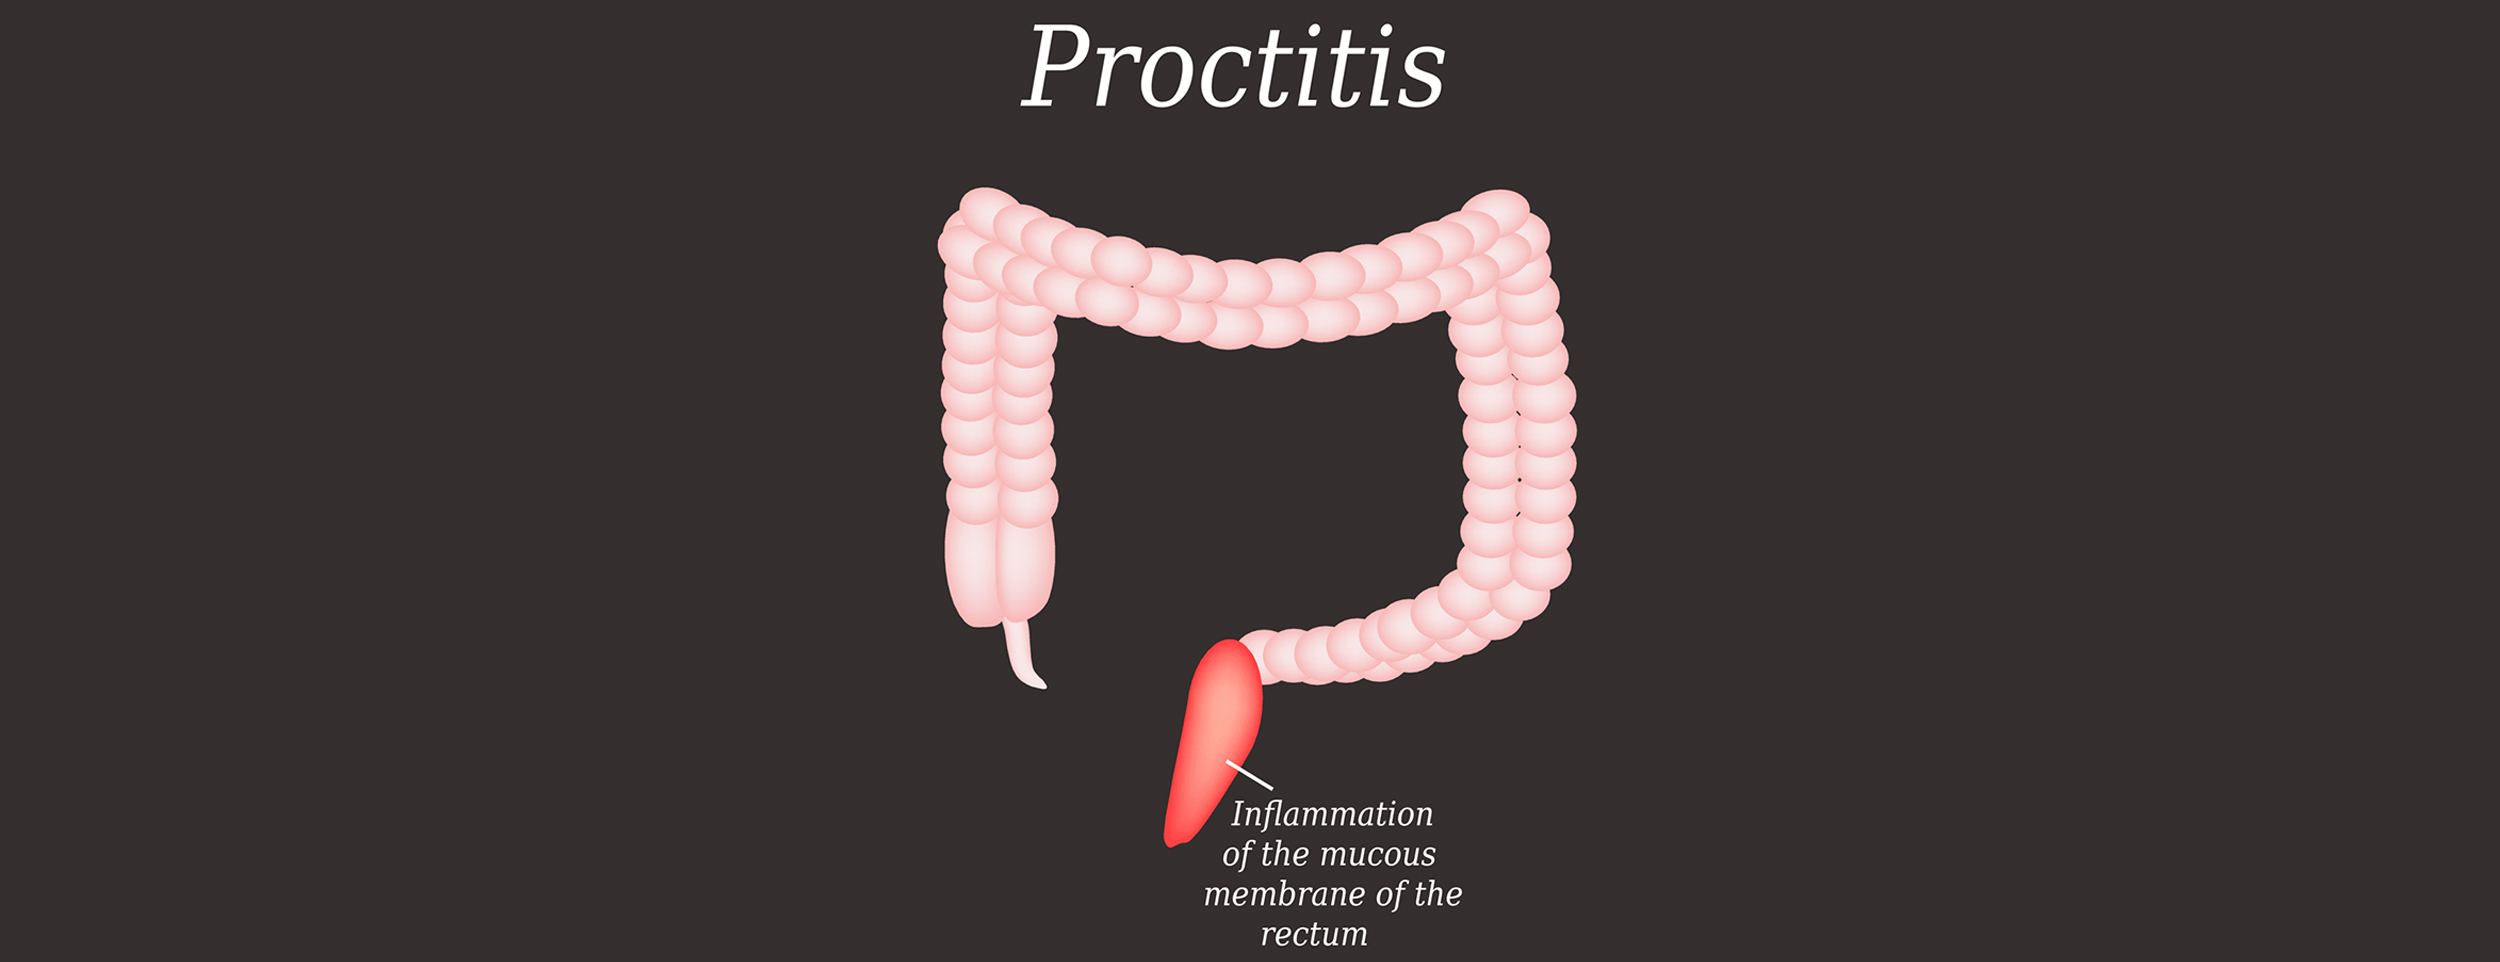 Other causes of pruritus and proctitis can be caused by hemorrhoids